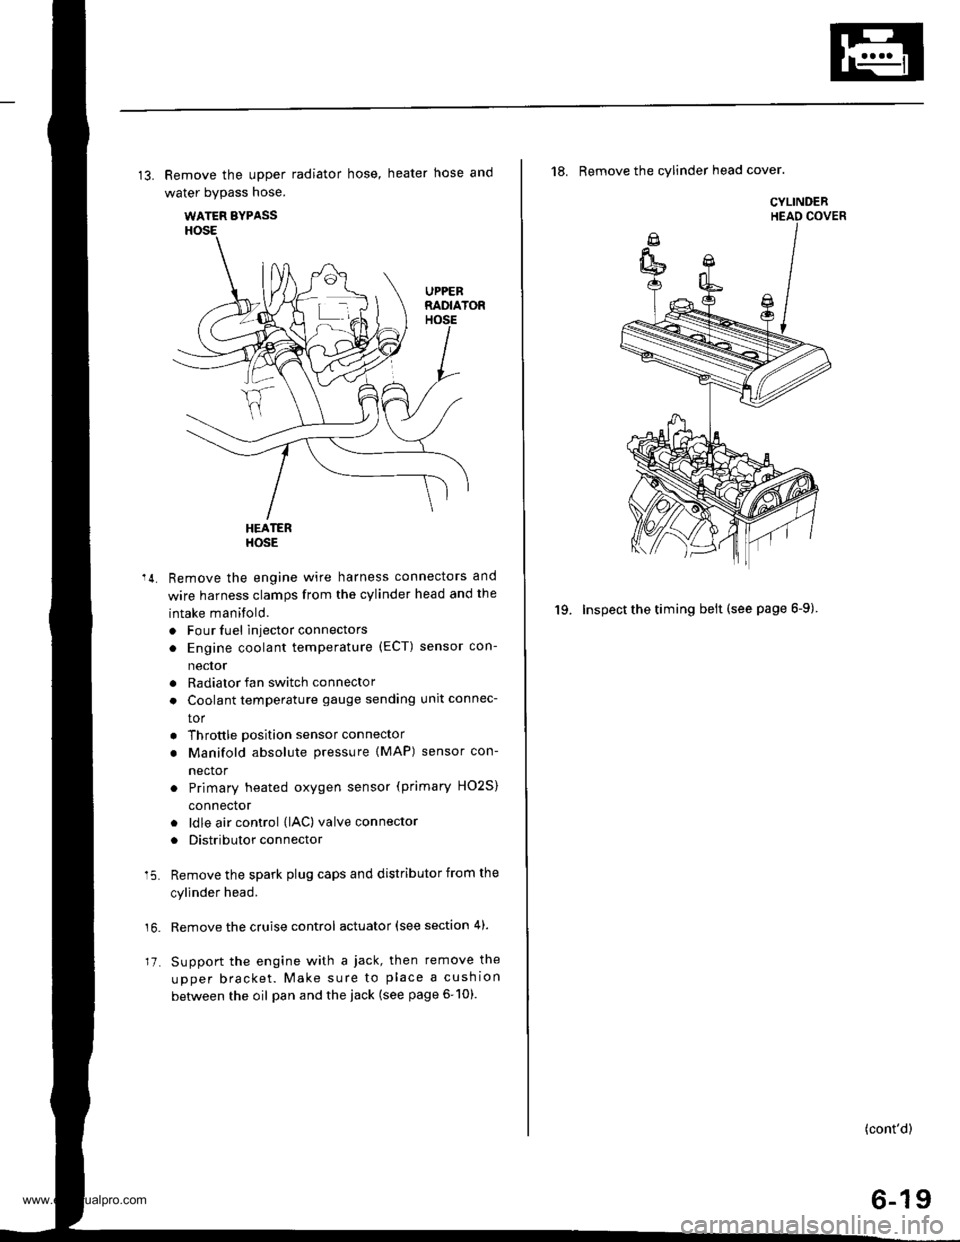 HONDA CR-V 2000 RD1-RD3 / 1.G Workshop Manual 
13. Remove the upper radiator hose, heater hose and
water bypass hose.
WATER BYPASS
UPPEBRADIATORHOSE
17
HEATERHOSE
Remove the engine wire harness connectors and
wire harness clamps from the cylinder